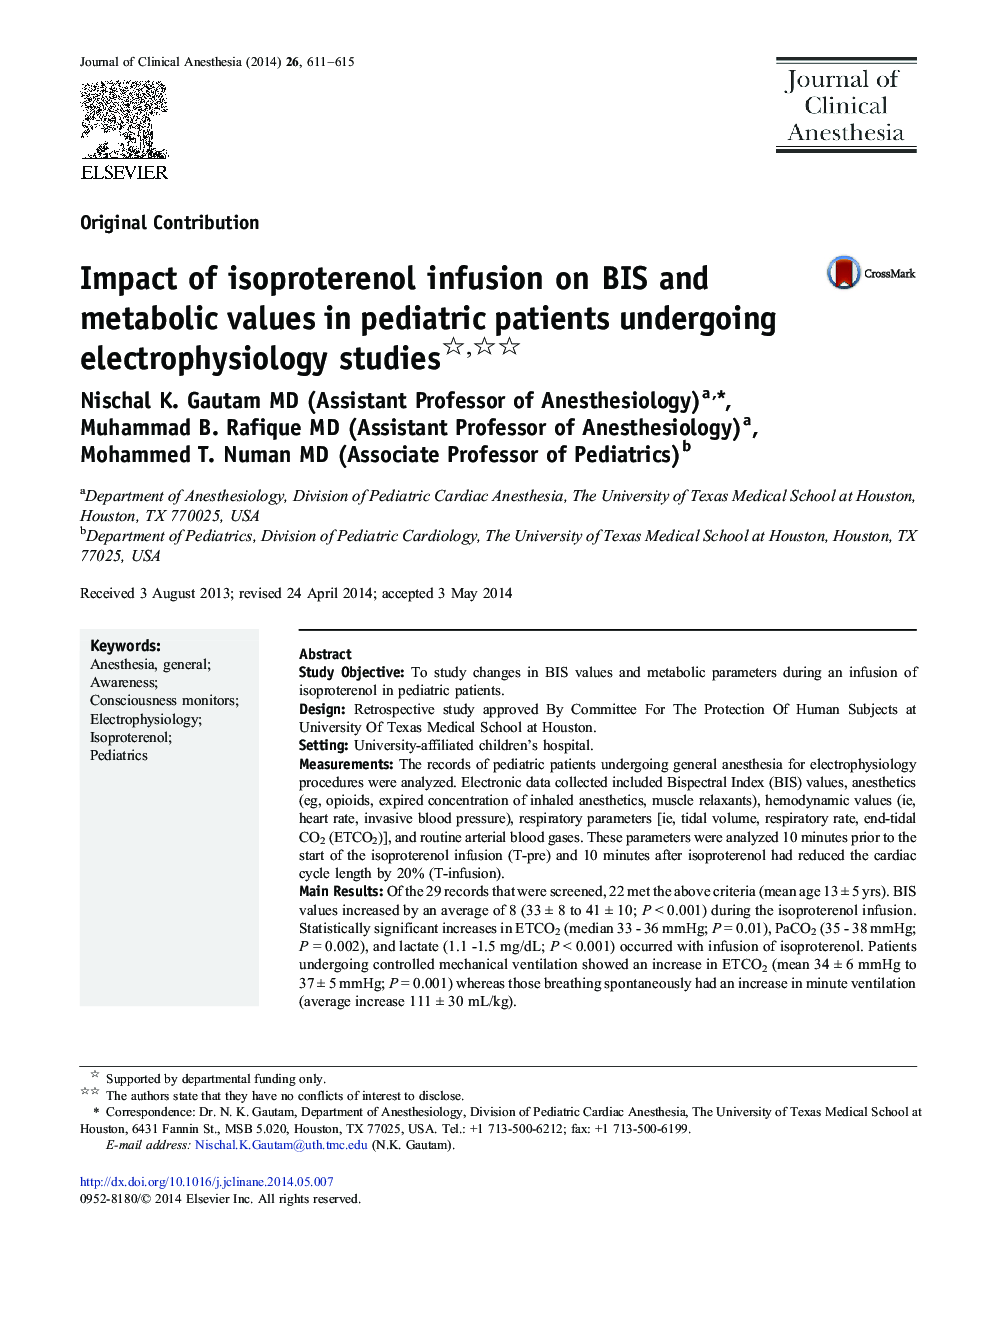 Impact of isoproterenol infusion on BIS and metabolic values in pediatric patients undergoing electrophysiology studies 